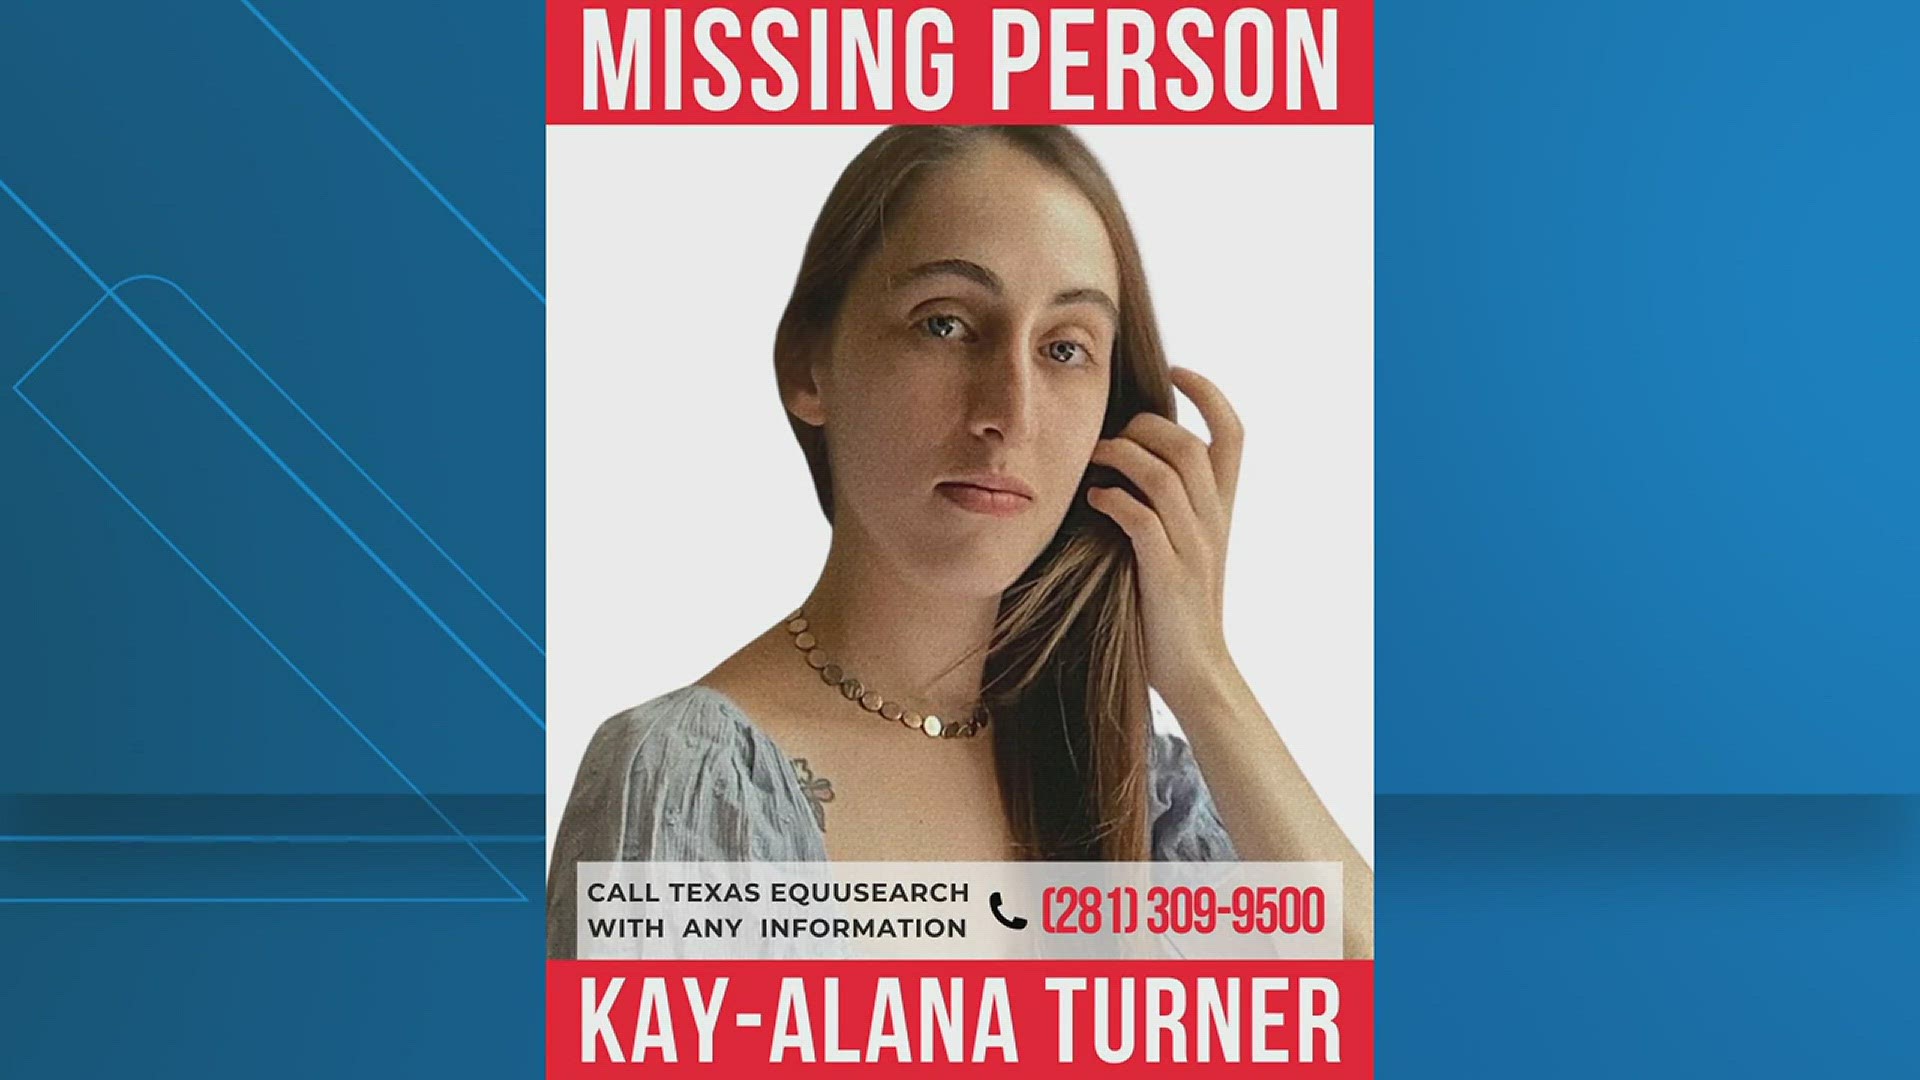 It's been 257 days since the now-28-year-old Kay-Alana vanished in Tomball.